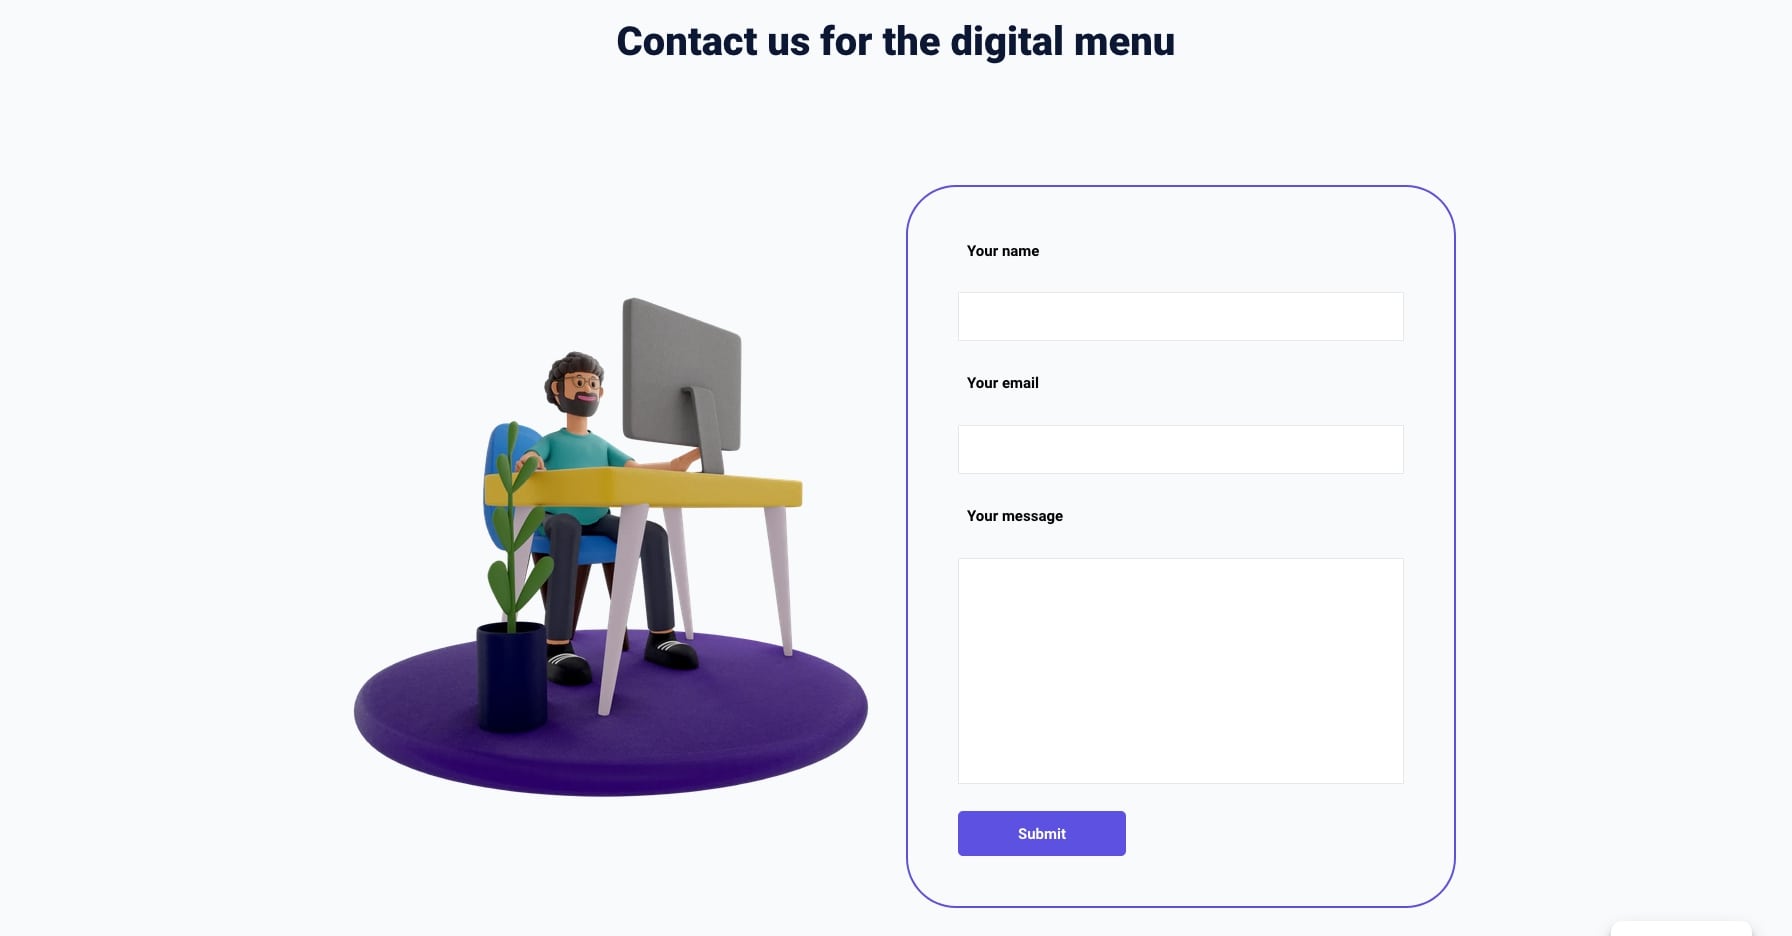 To be close to customers, they have the opportunity to get in touch with the Customenu team, through a contact form displayed at the bottom of the page.